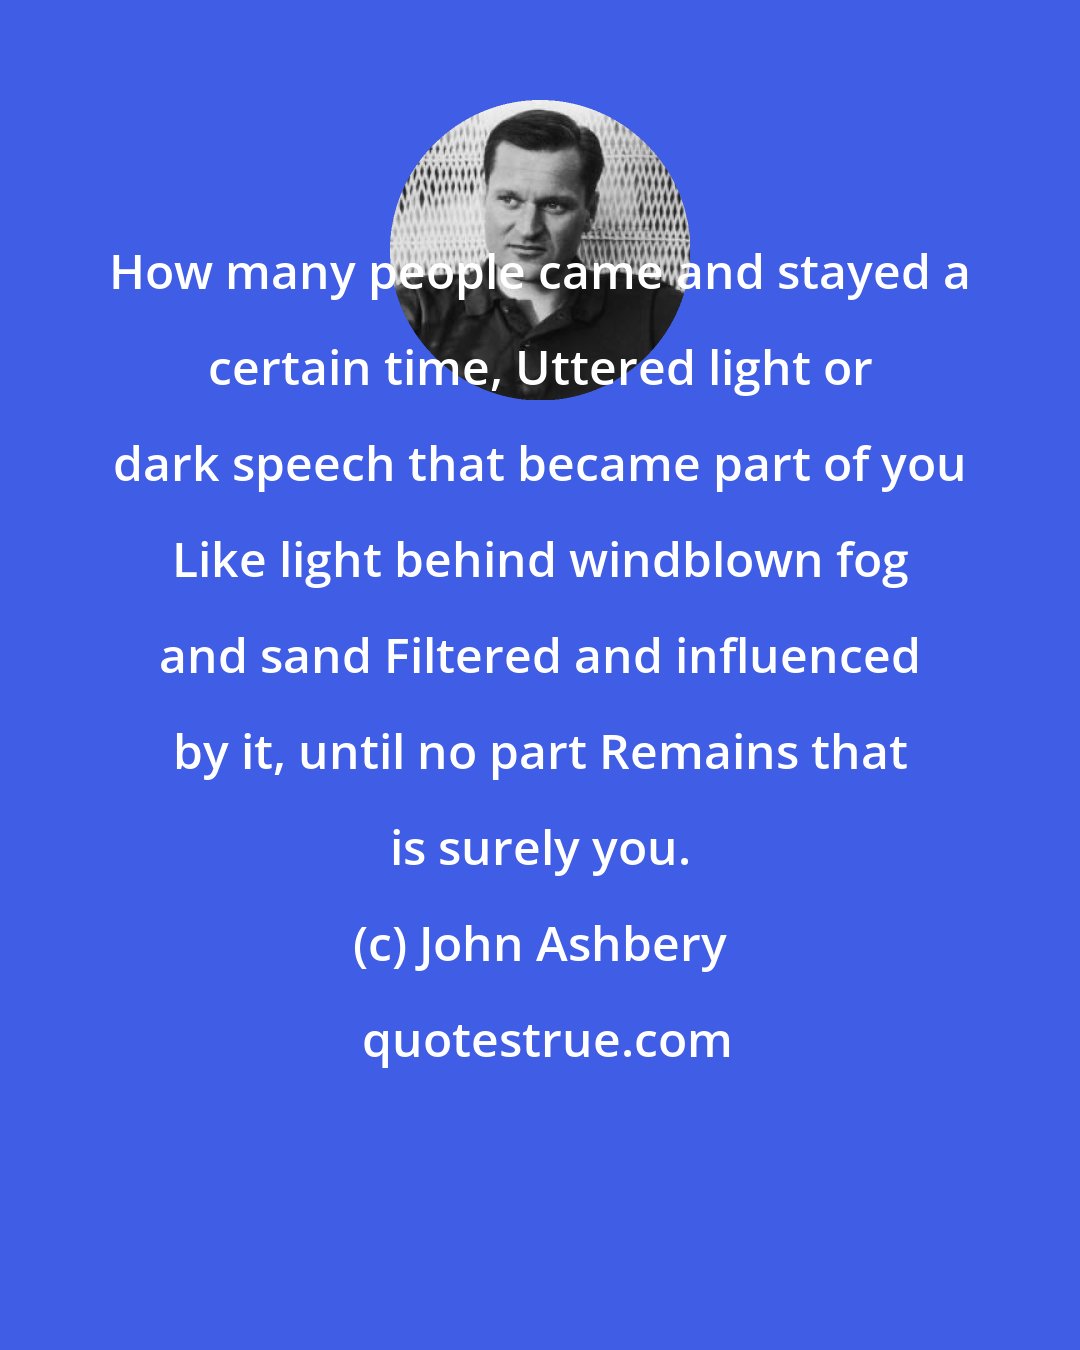 John Ashbery: How many people came and stayed a certain time, Uttered light or dark speech that became part of you Like light behind windblown fog and sand Filtered and influenced by it, until no part Remains that is surely you.